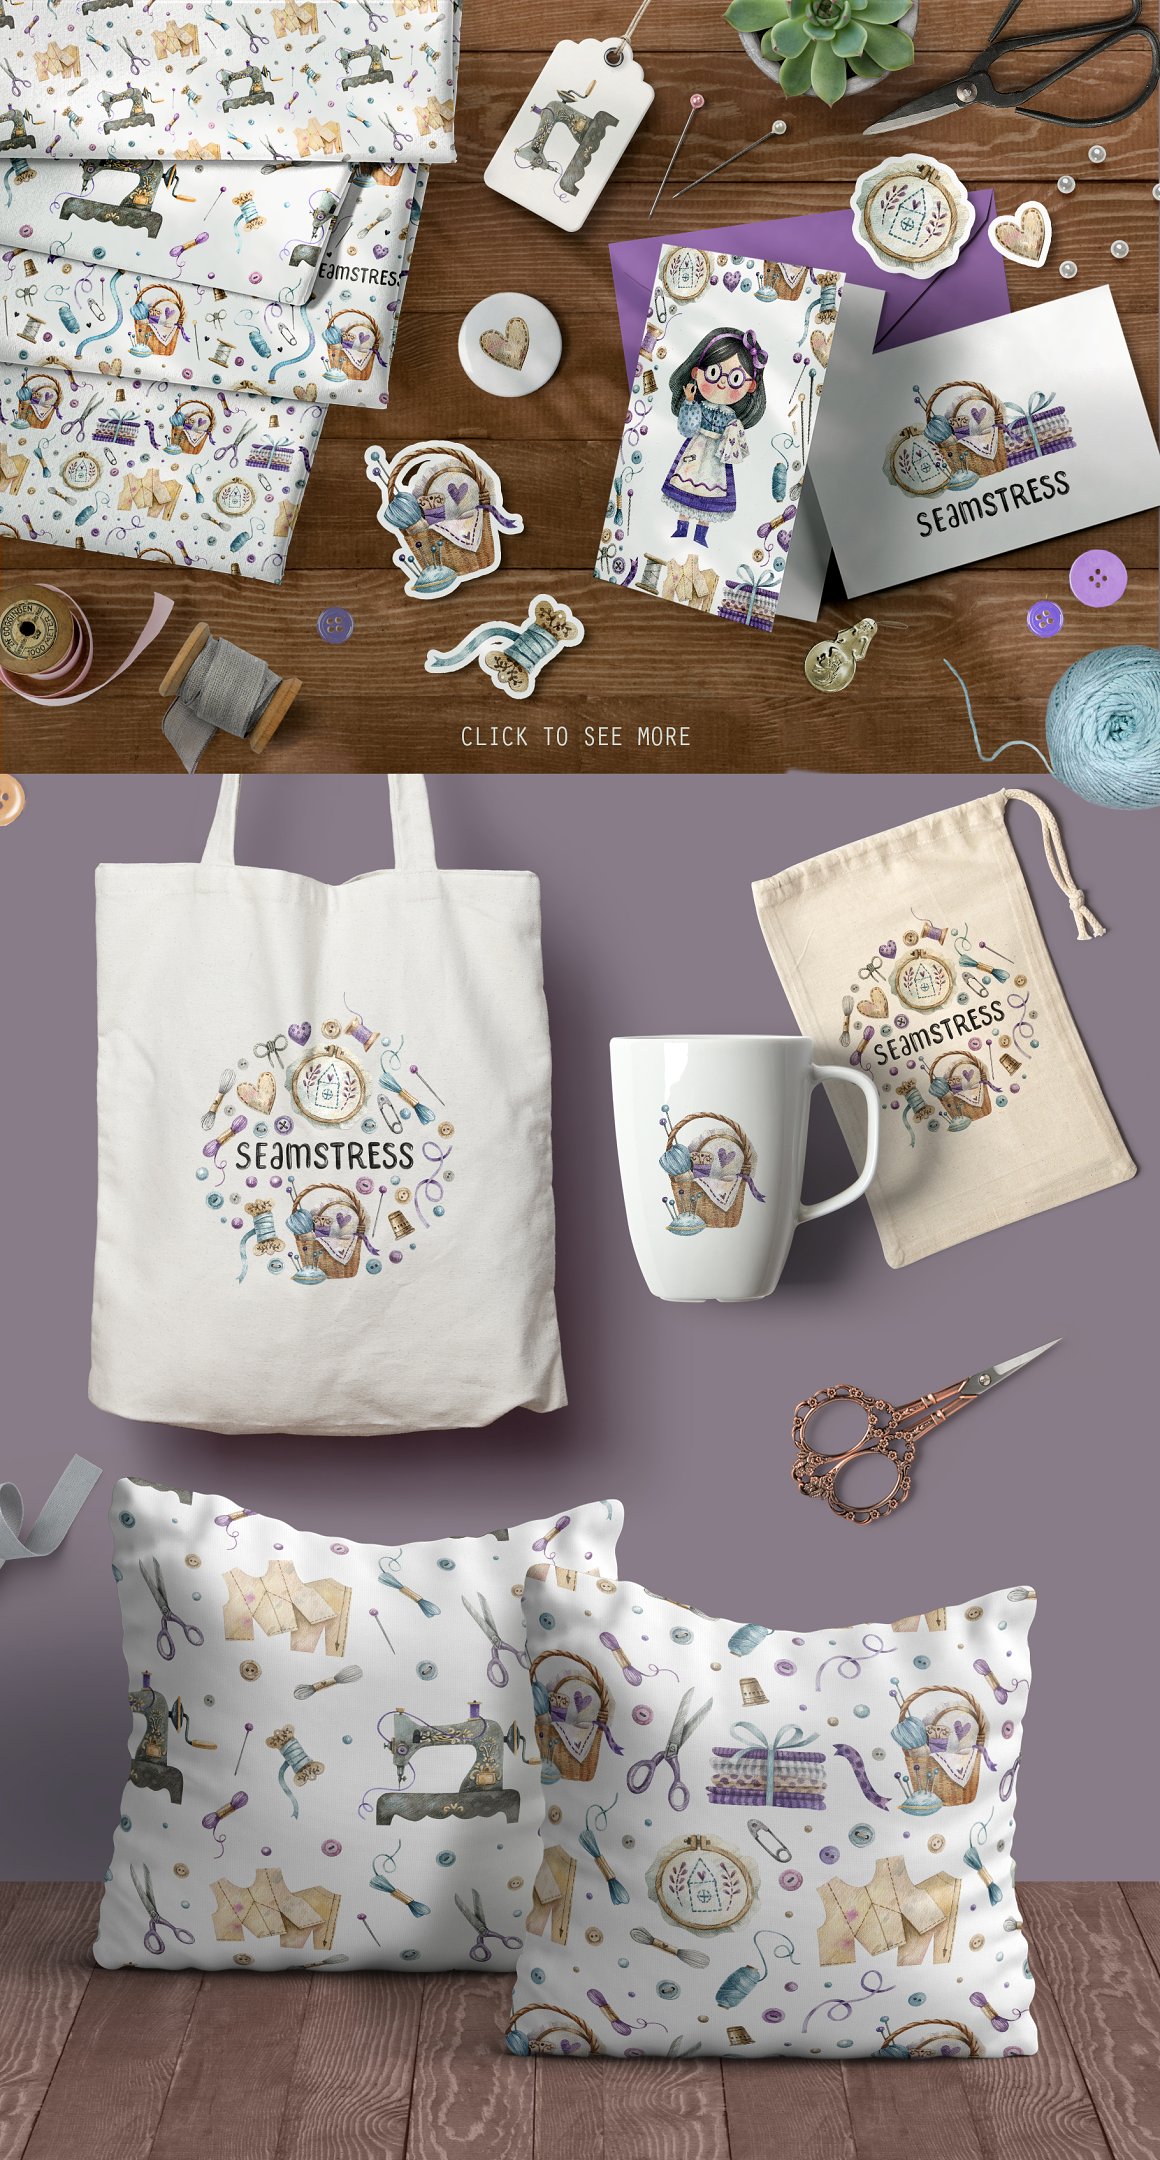 Prints with a theme on bags, cups, etc.